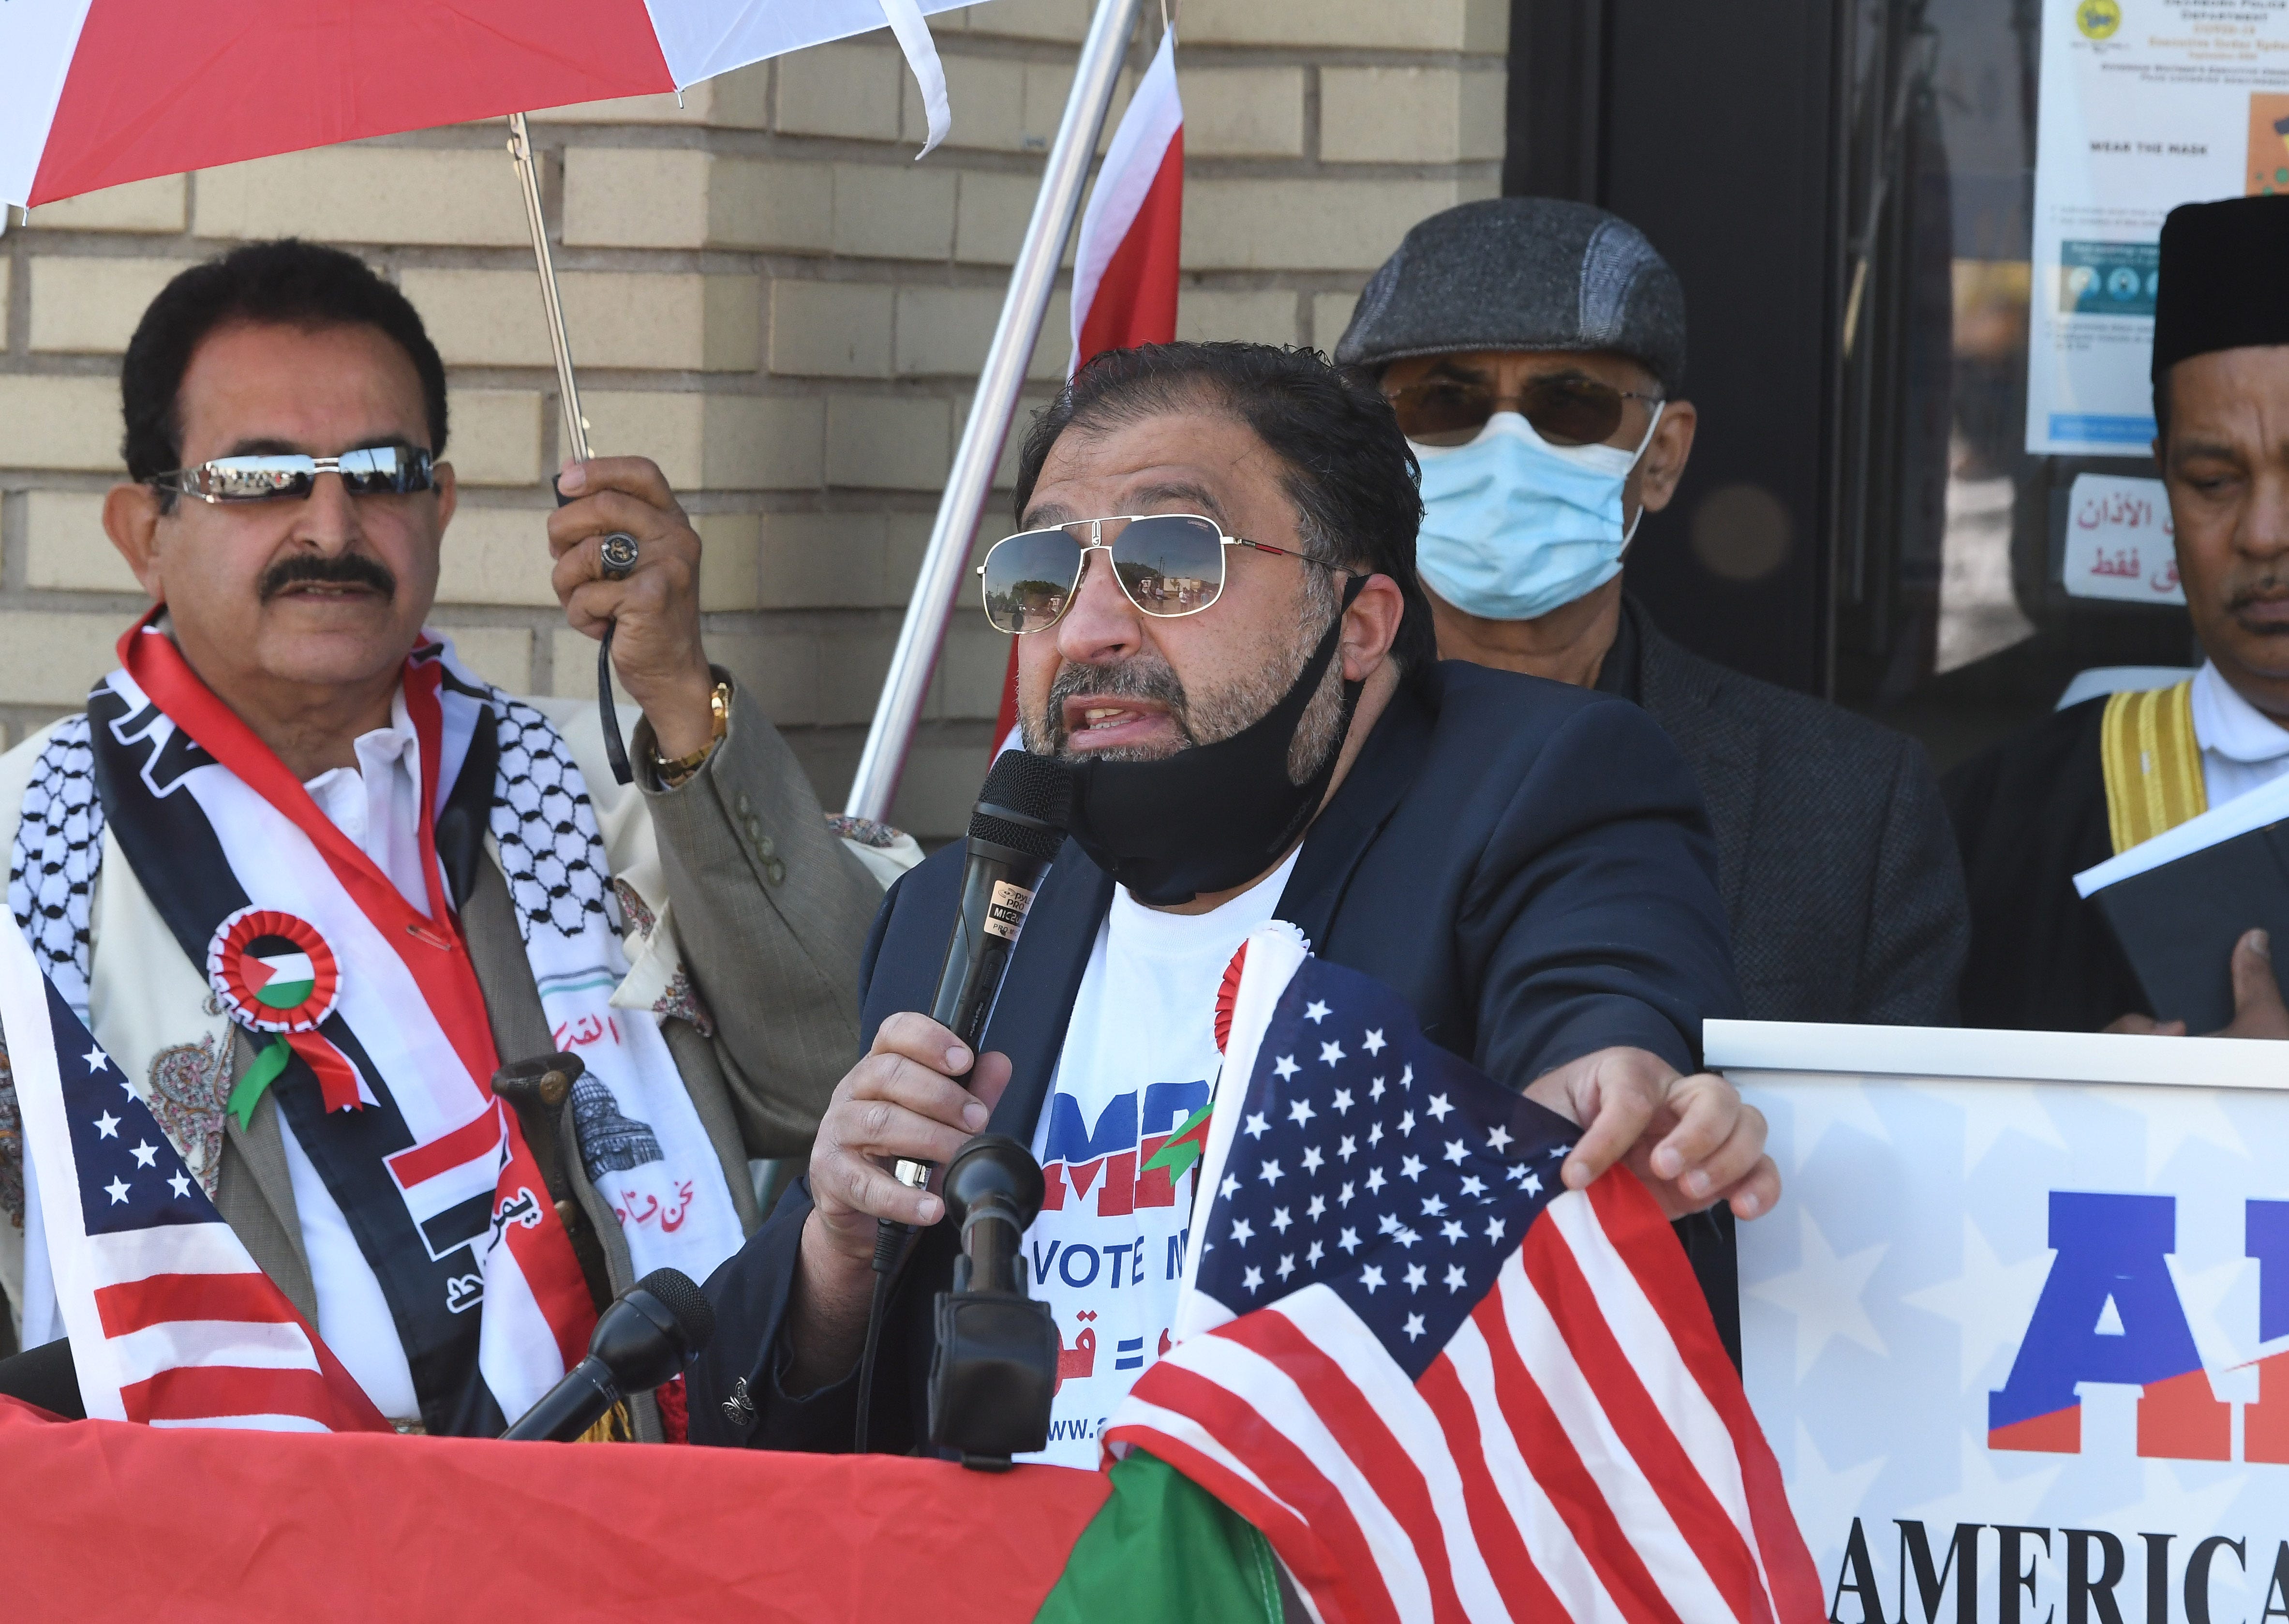 "This flag means justice, this flag means fairness," comments Abdallah Sheik, president of the American Muslim Political Action Committee, AMPAC during a press conference at the AMS Mosque in Dearborn, Michigan on May 18, 2021.